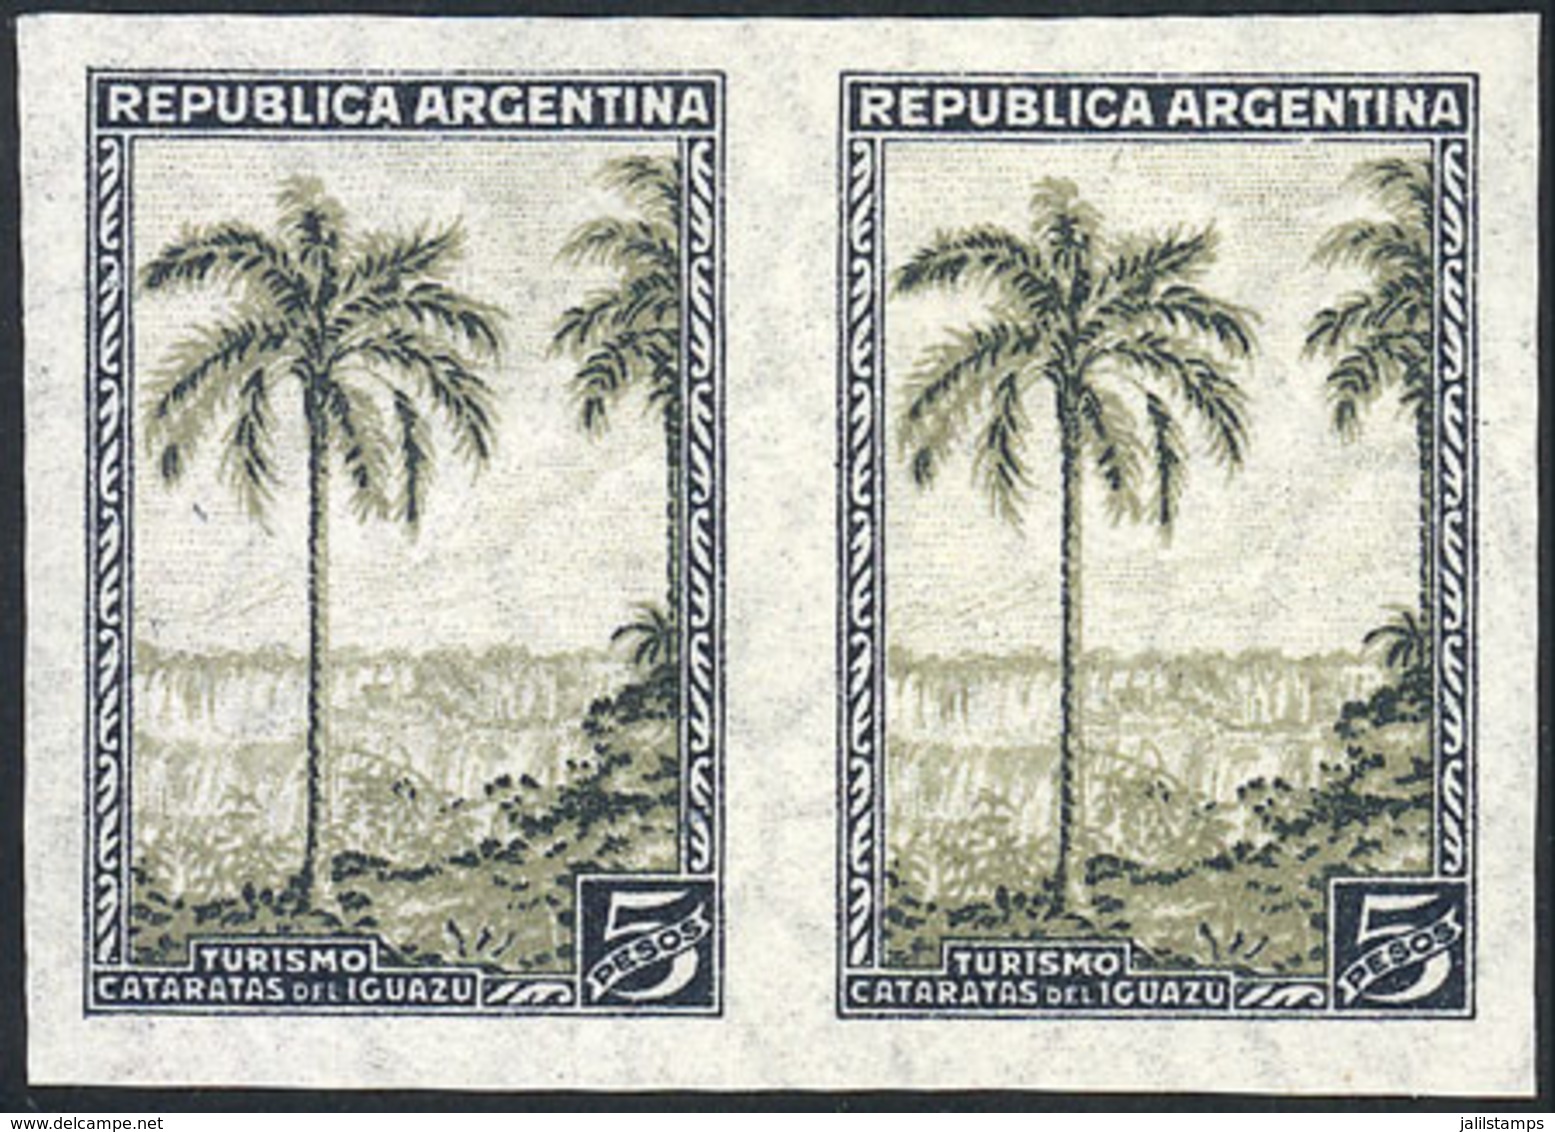 ARGENTINA: GJ.793P, 5P. Iguazú Falls, Watermark Sun With Straight Rays, IMPERFORATE PAIR, MNH (+30%), Excellent Quality! - Briefe U. Dokumente